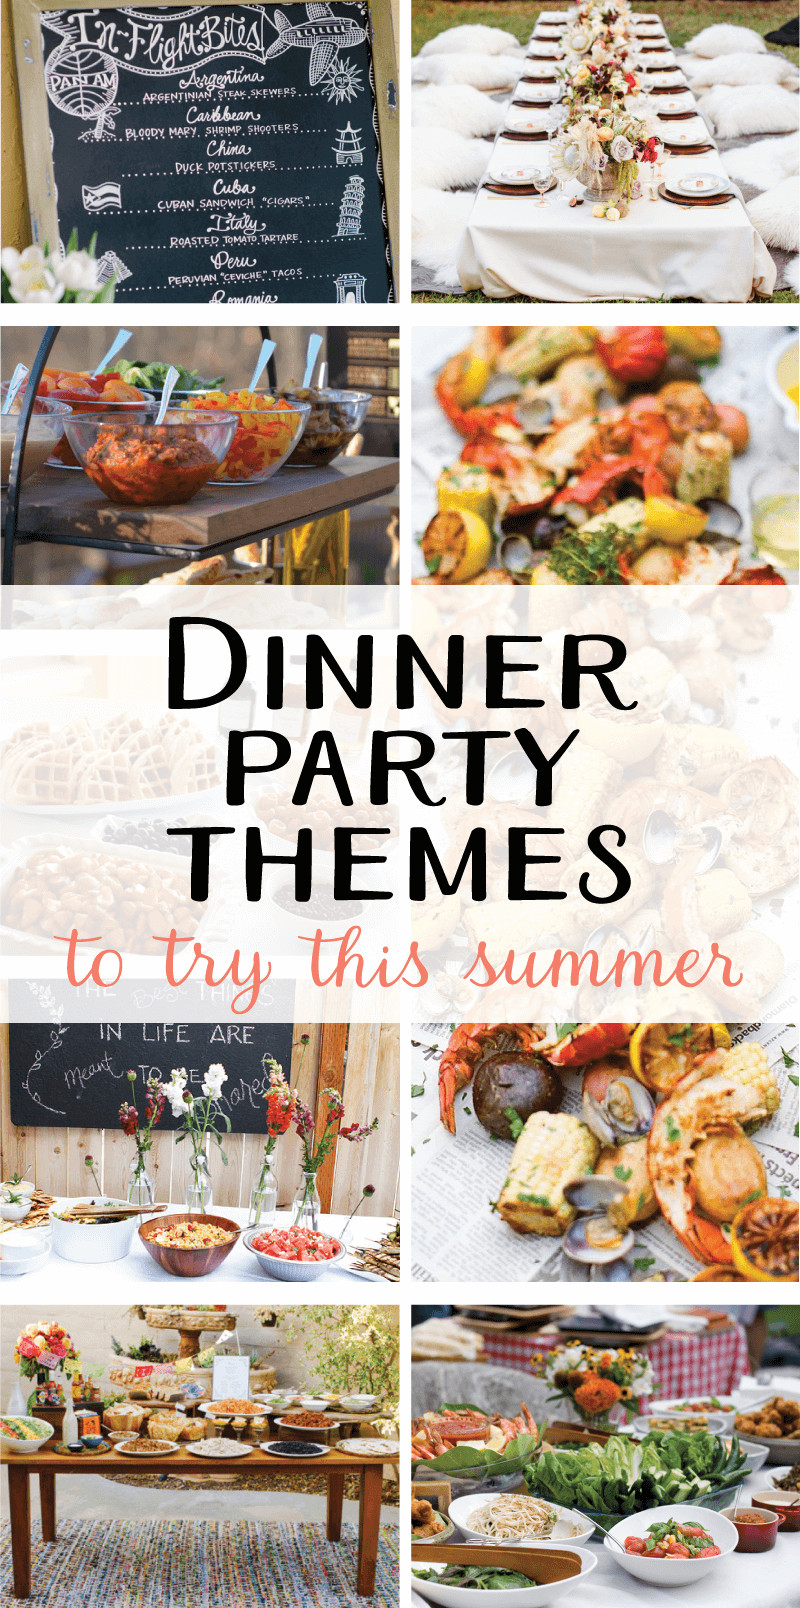 Dinner Party Dinner Ideas
 9 Creative Dinner Party Themes to Try this Summer on Love